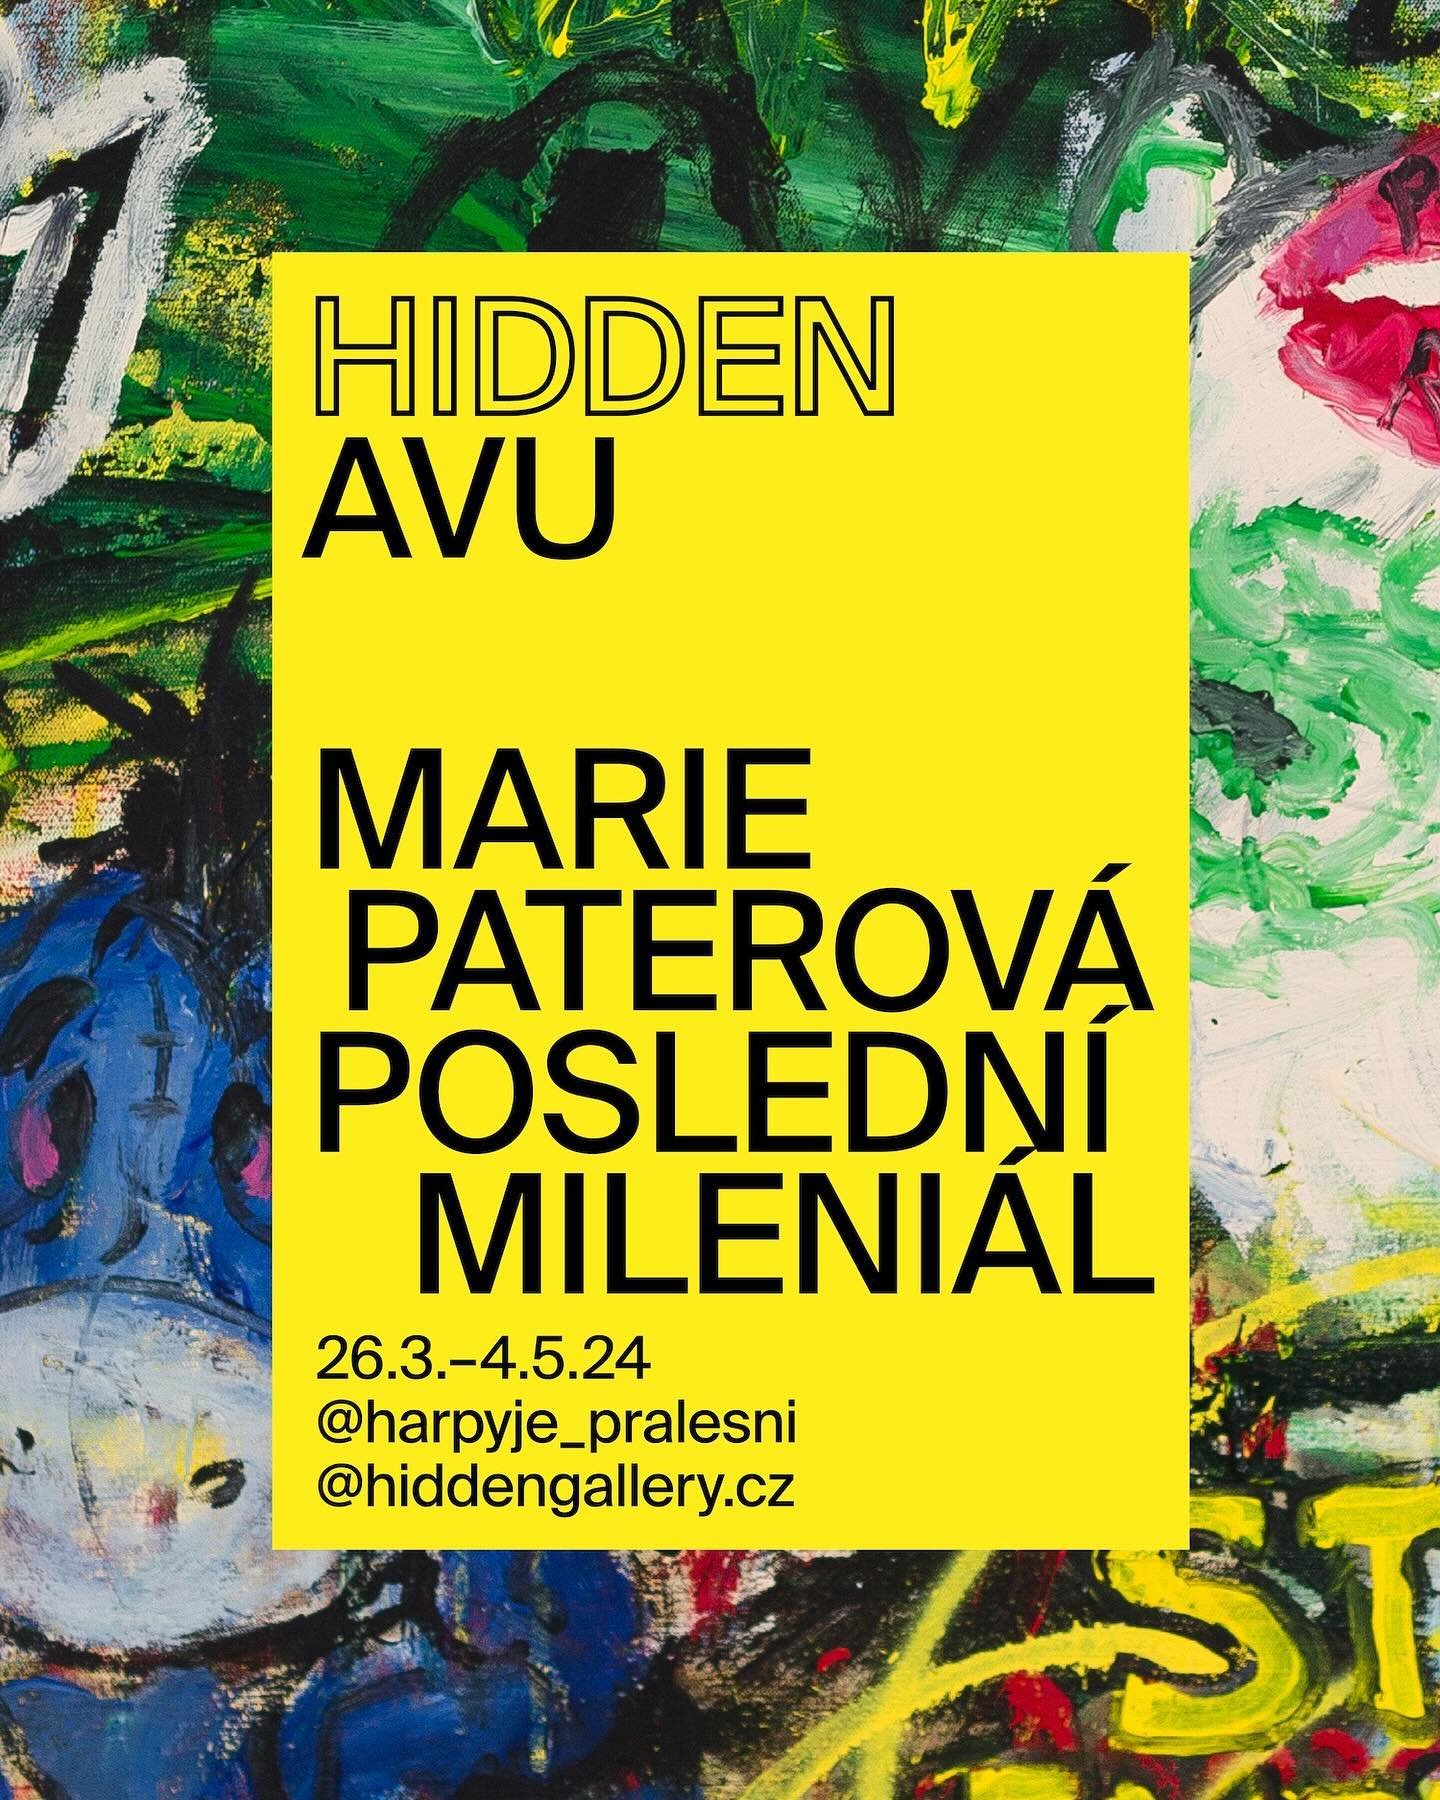 Join us for another double exhibition at HIDDEN! This Tuesday, March 26th, we&rsquo;re thrilled to unveil @harpyje_pralesni , an @avu_prague student, at HIDDEN AVU in collaboration with @avumalba2 . Alongside three students @hanamarhoun @anastazieeiz